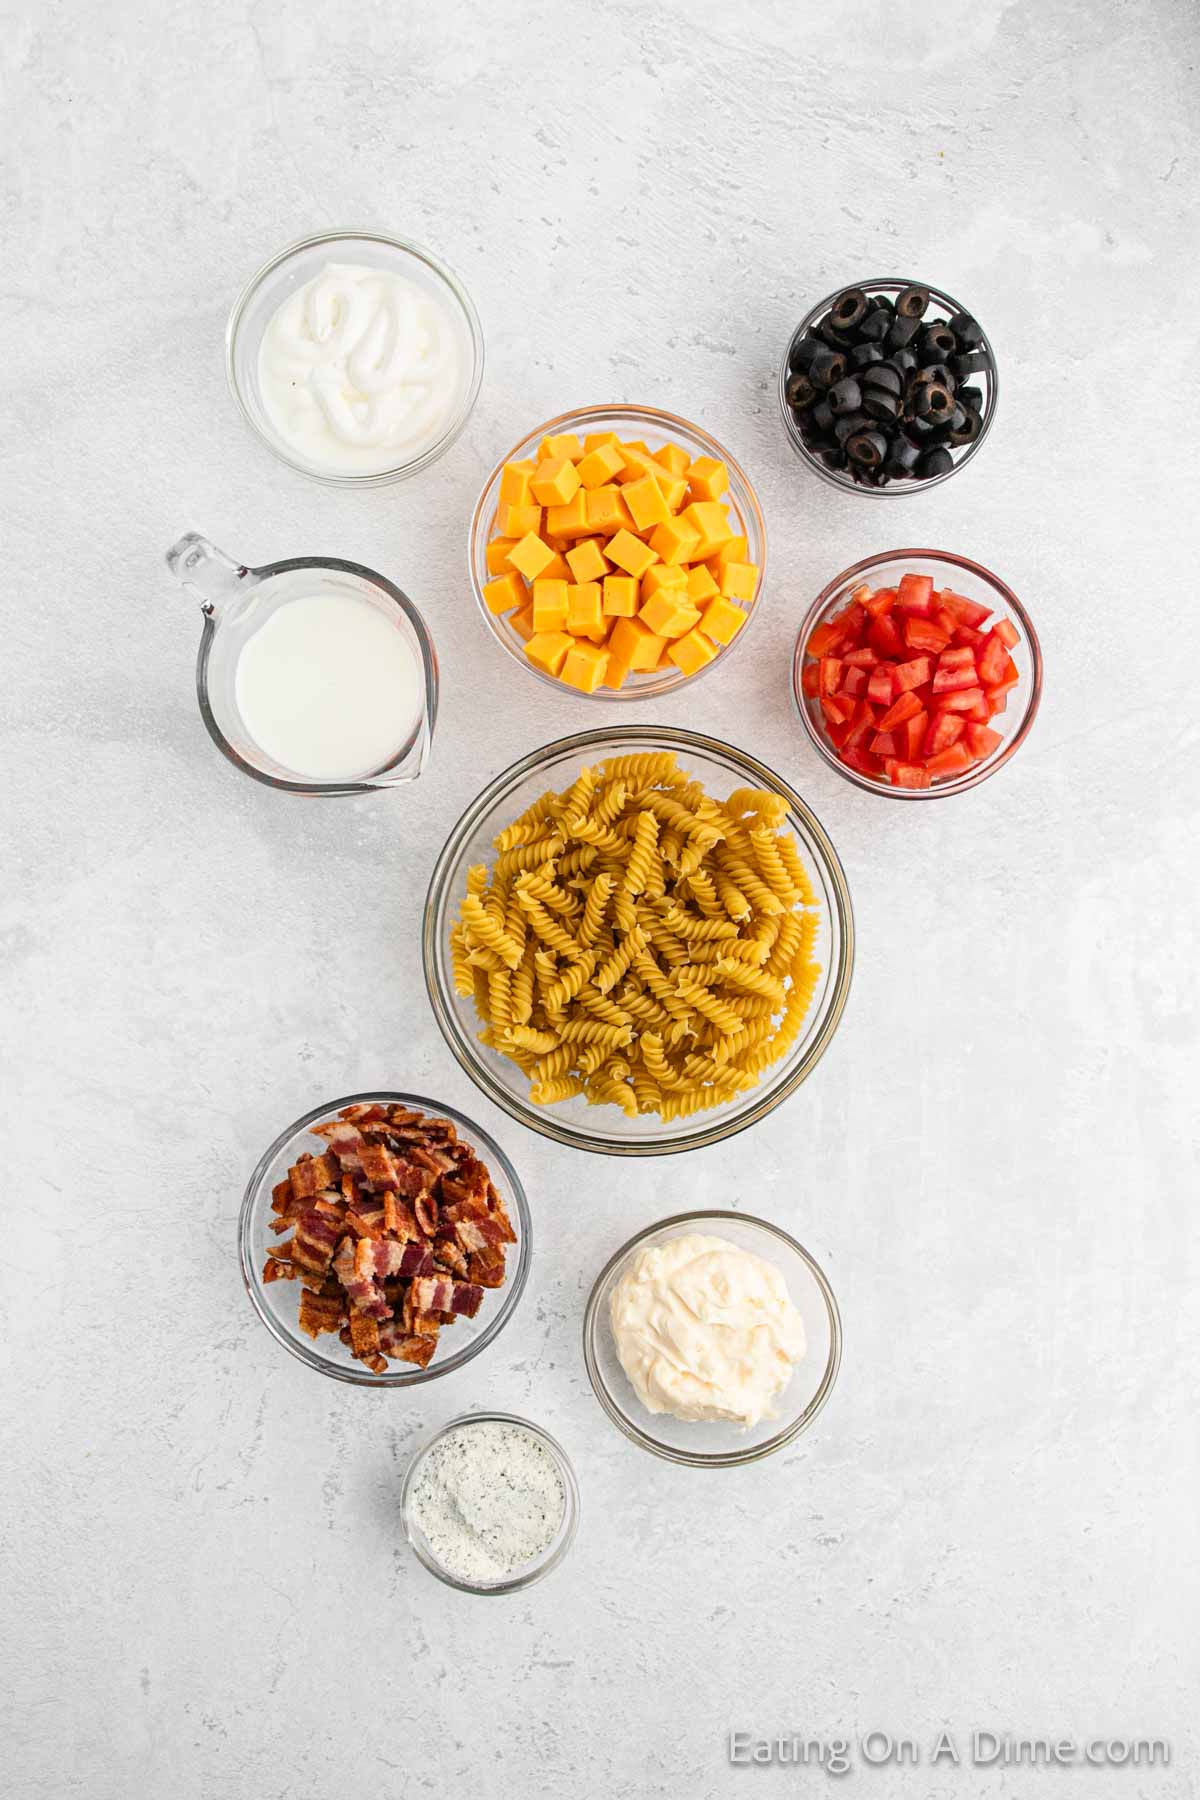 Bowls of pasta, ranch, black olives, cheese cubes, diced tomatoes, chopped bacon, mayonnaise, sour cream